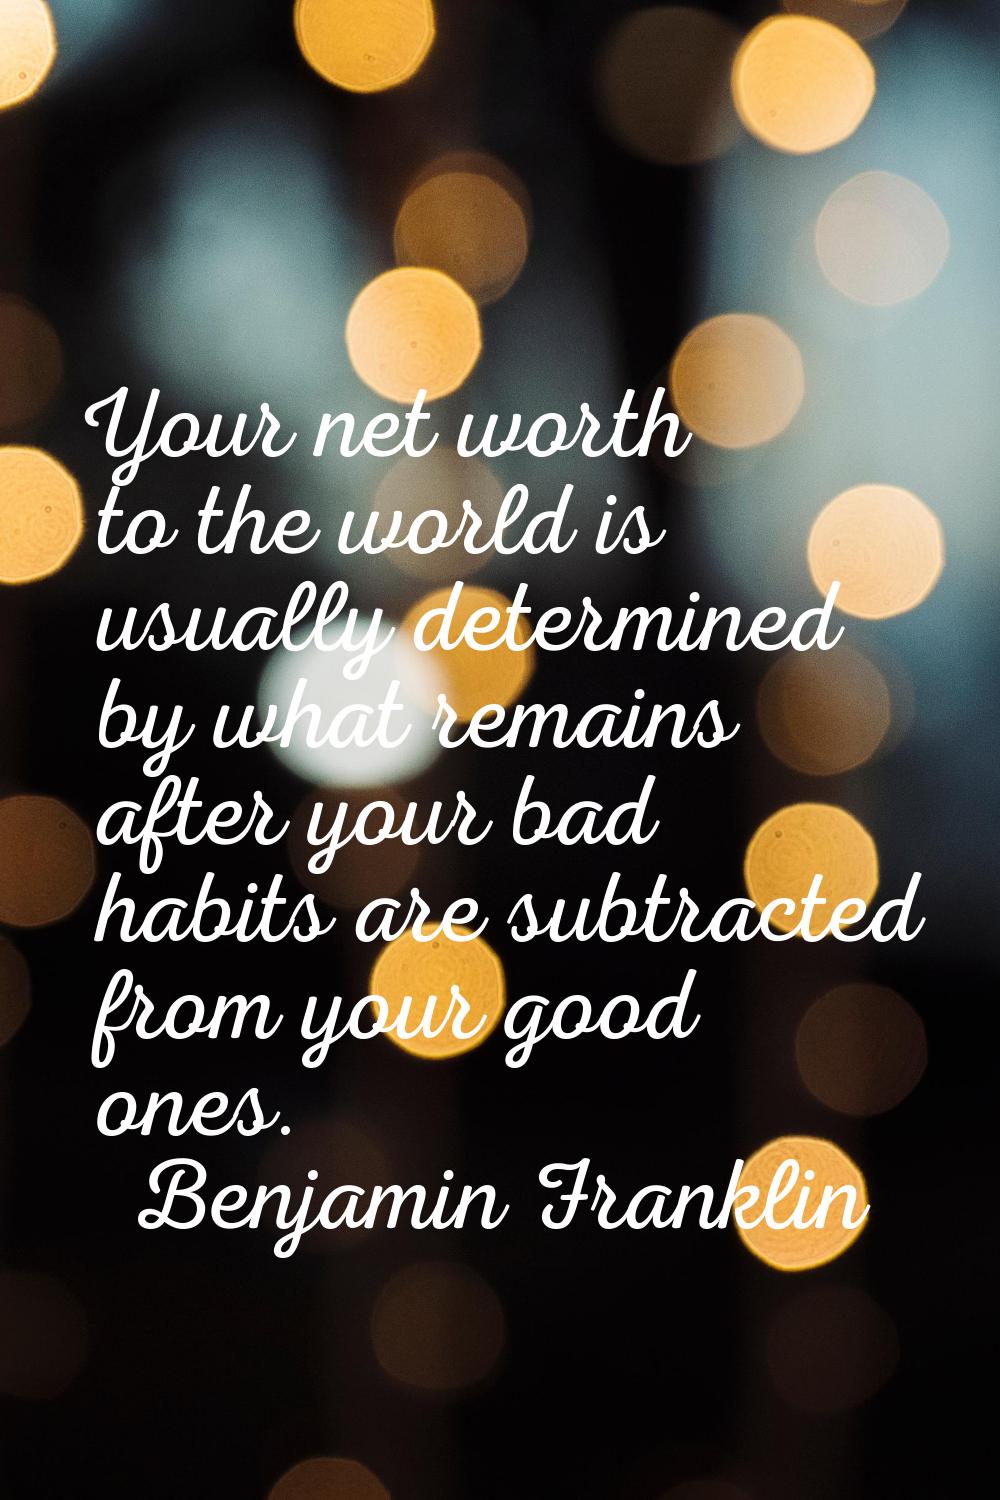 Your net worth to the world is usually determined by what remains after your bad habits are subtrac